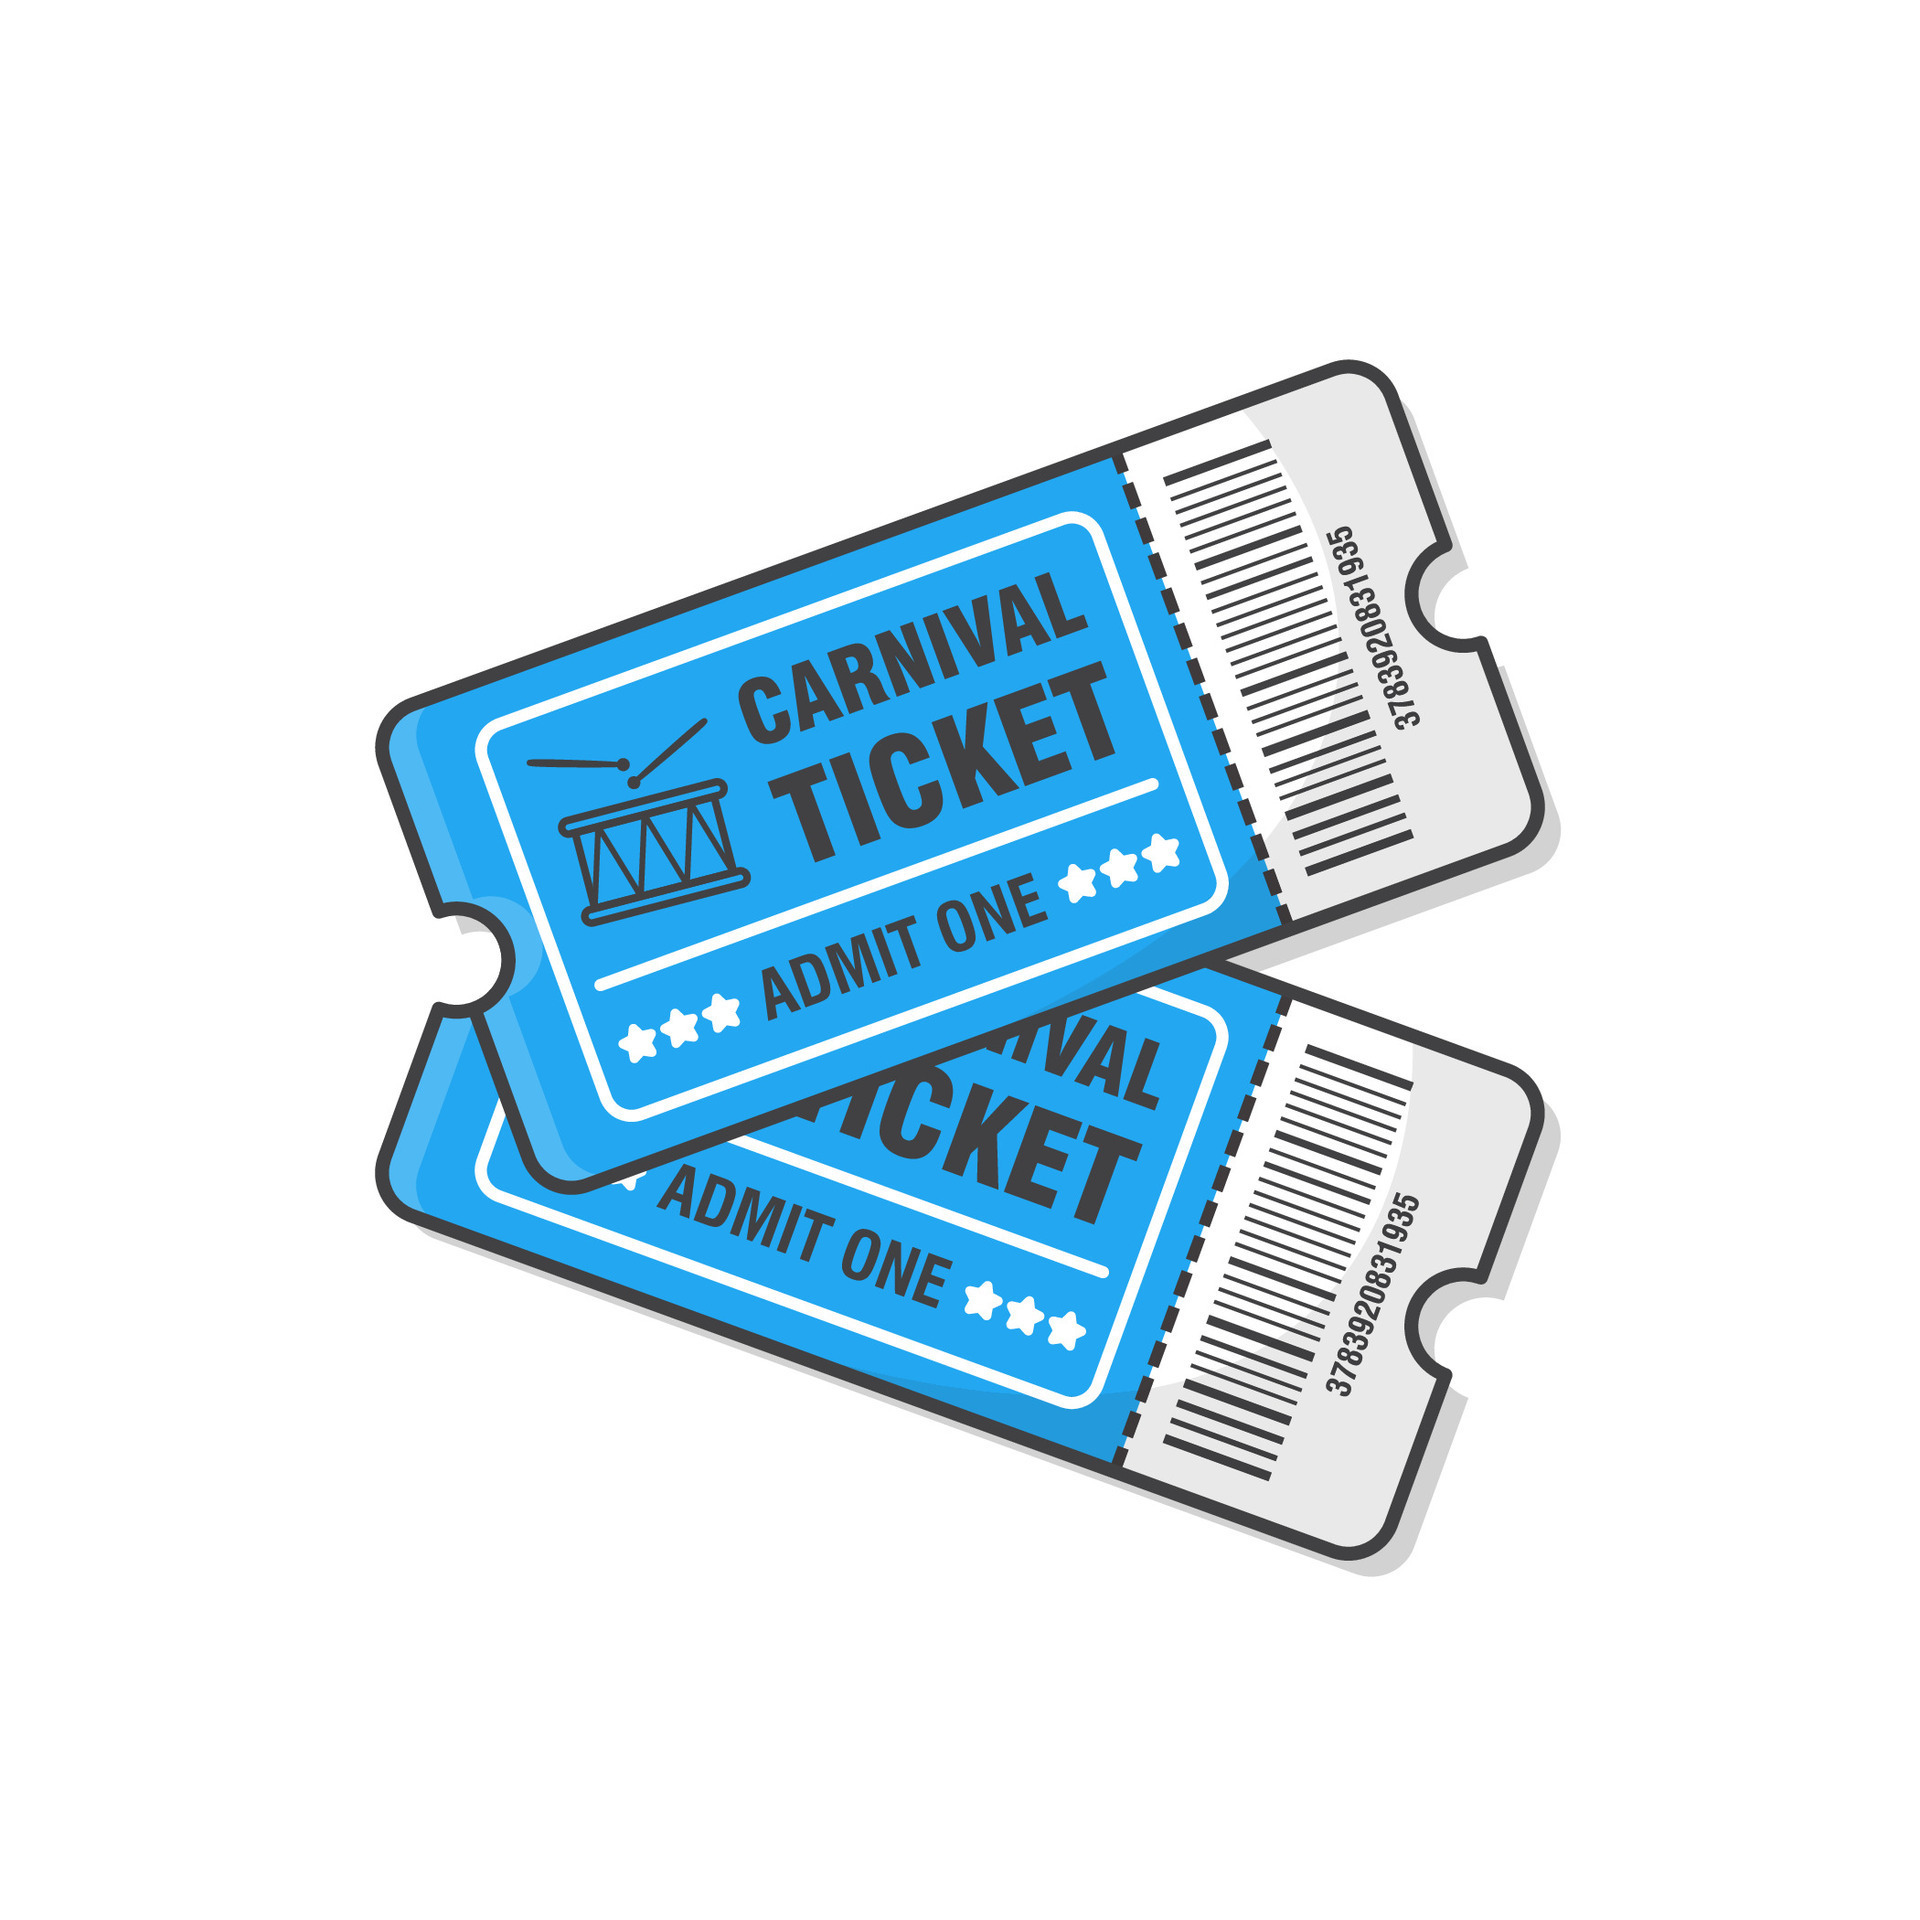 Two Carnival Tickets Vector Icon Illustration. Ticket For Entrance To